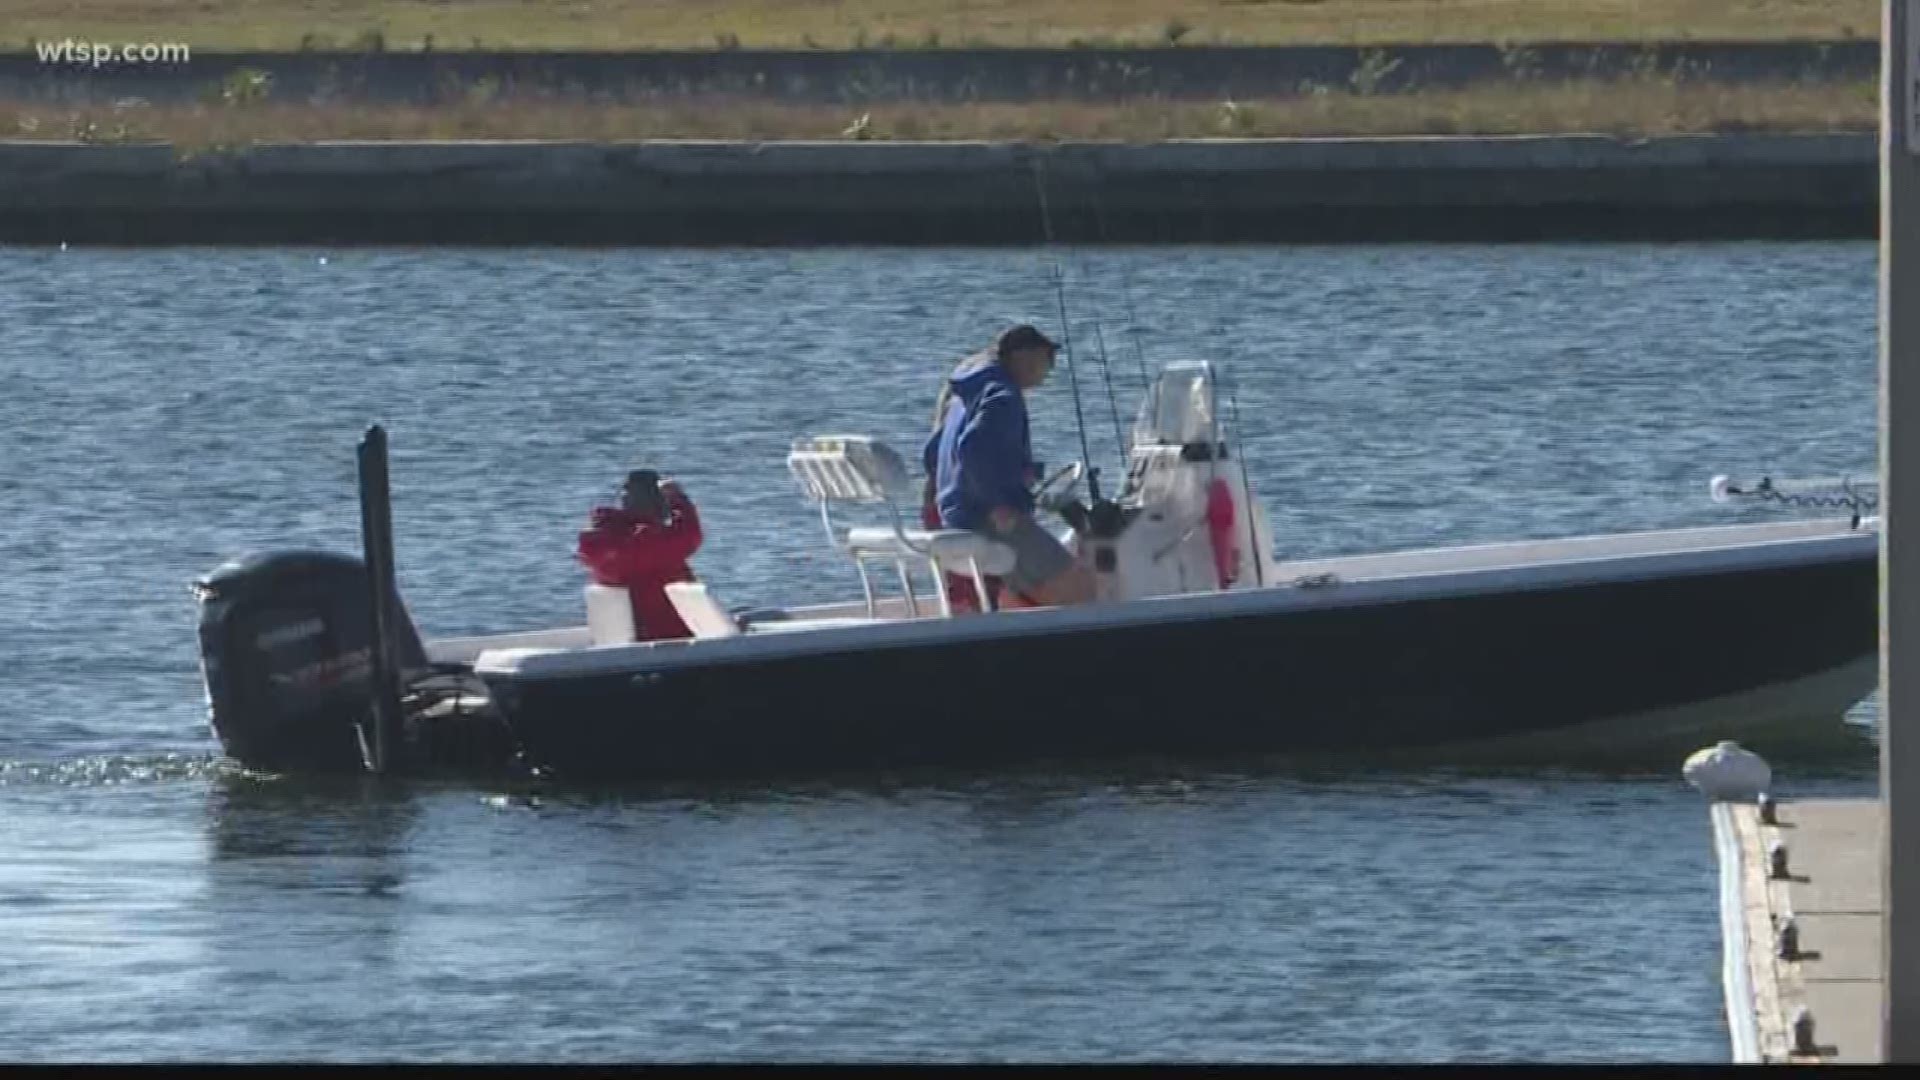 Officials will be watching for boaters driving under the influence.